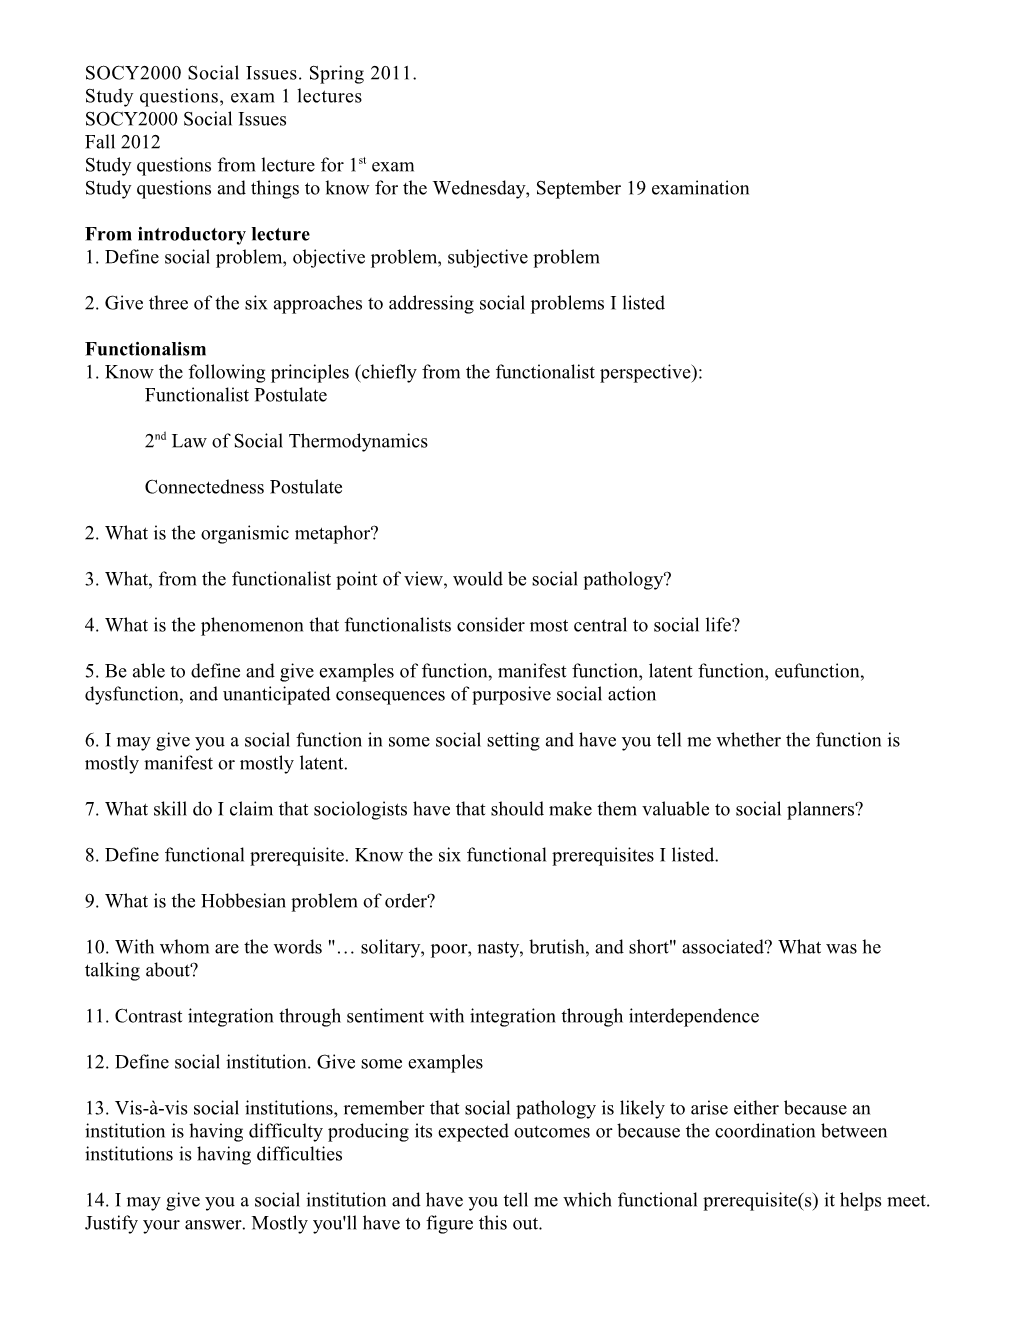 SOCY2000 Lecture Study Questions for Exam 1, Spring 2011